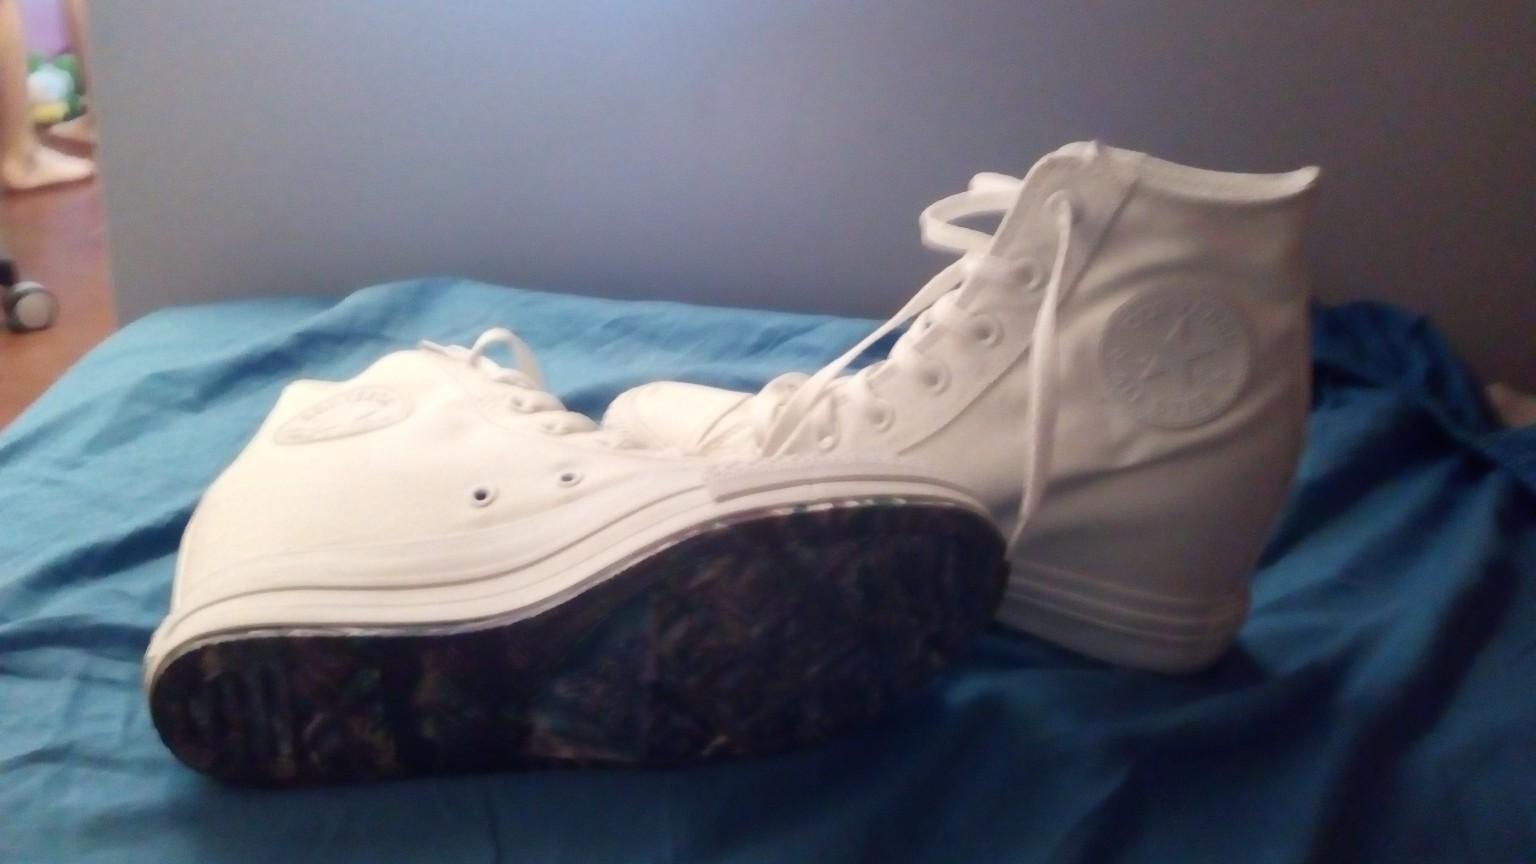 CONVERSE ALL STAR Chuck Taylor in 20900 Monza for €60.00 for sale | Shpock